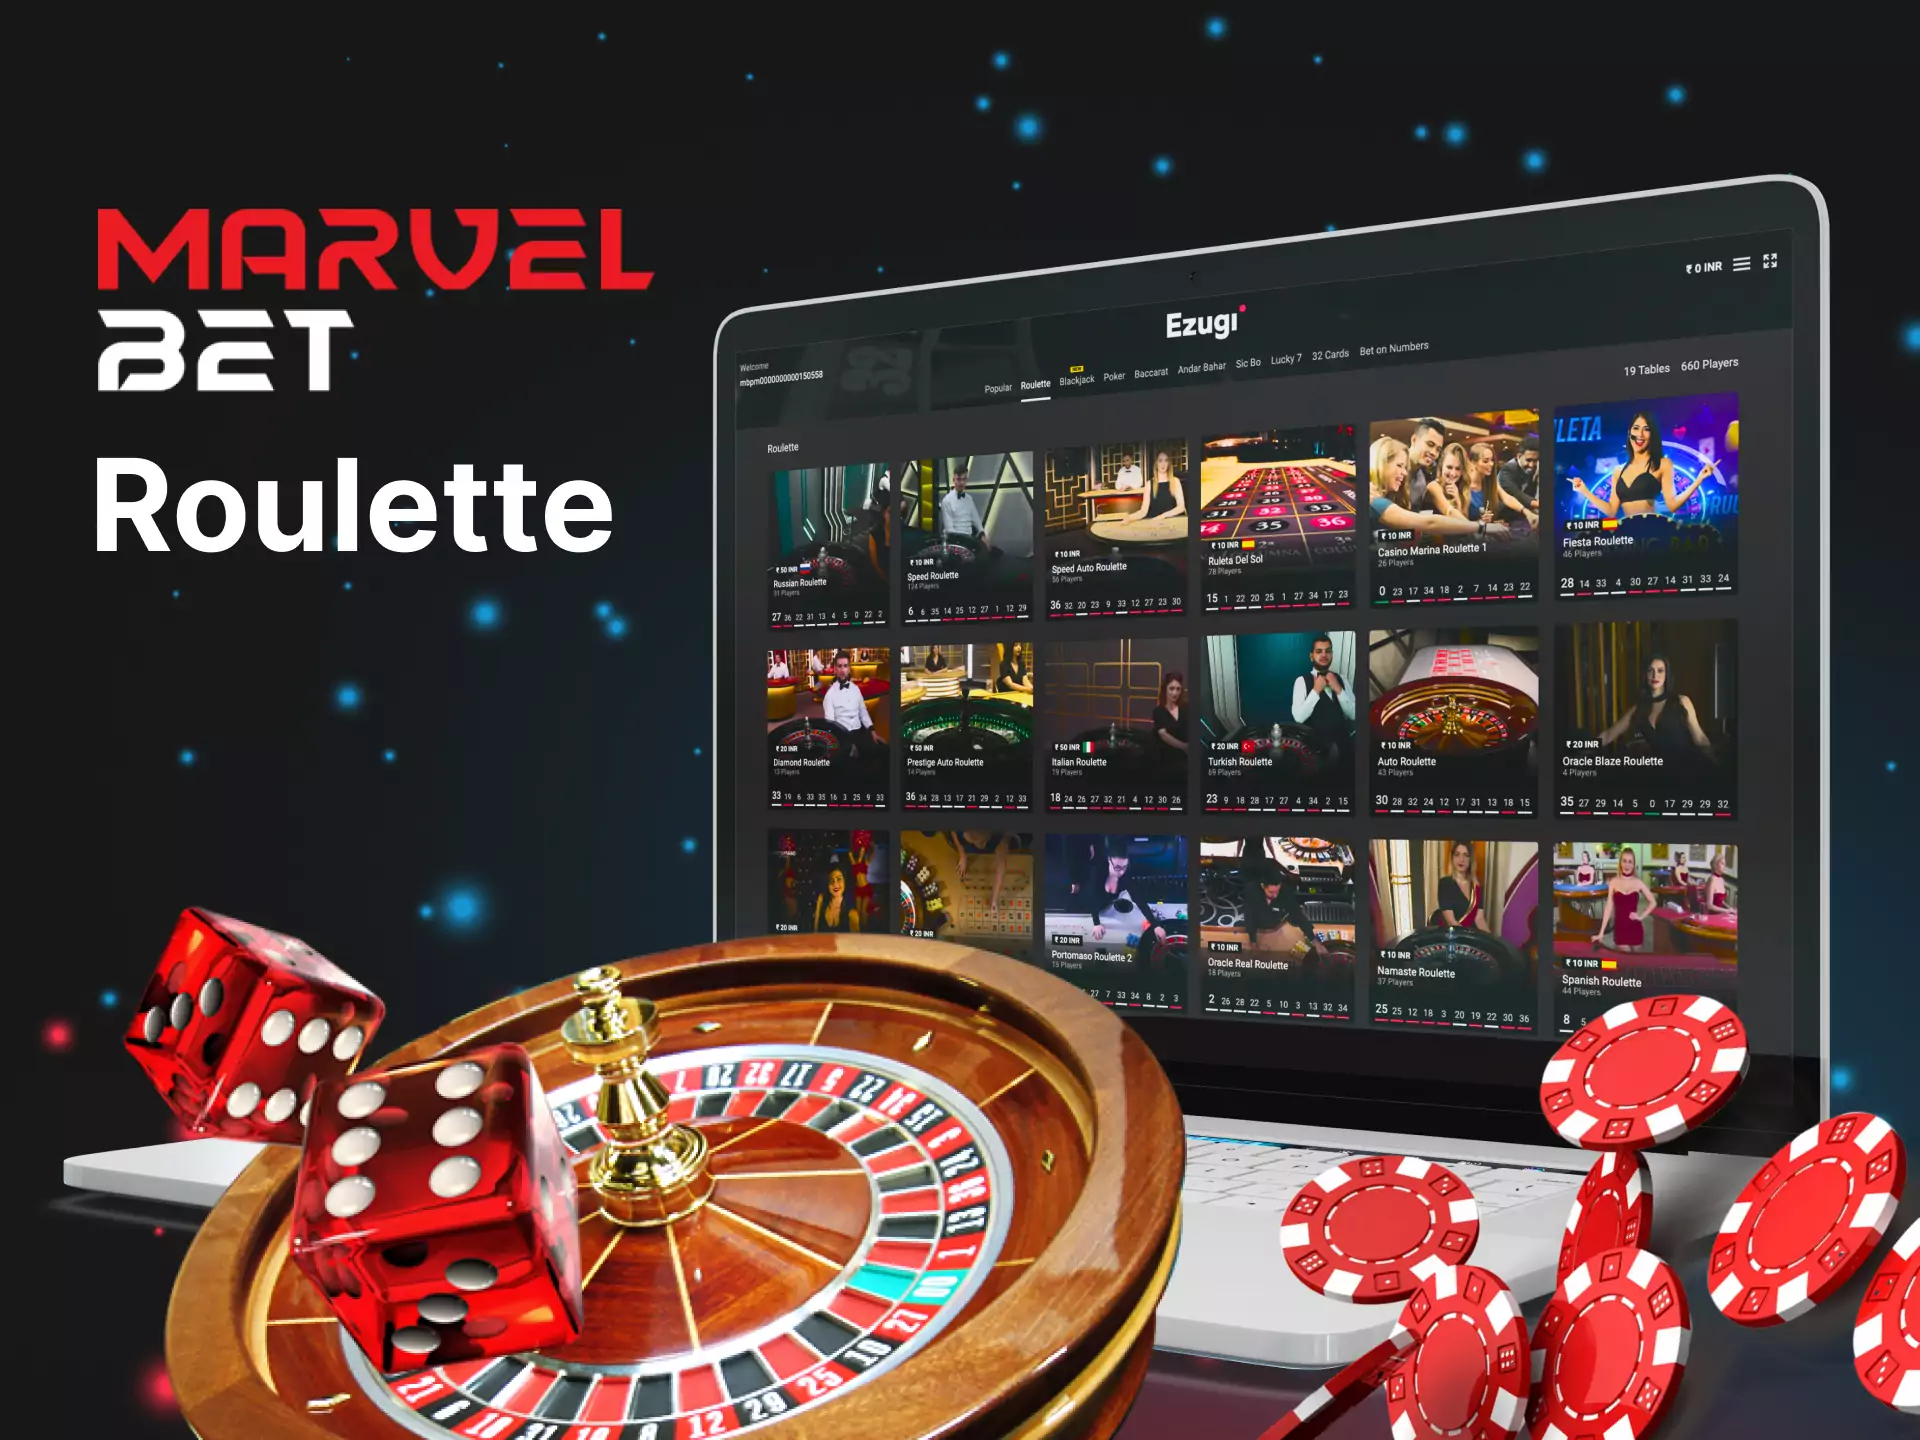 Roulette is an easy game with simple rules and has lots of fans in the Marvelbet Casino.